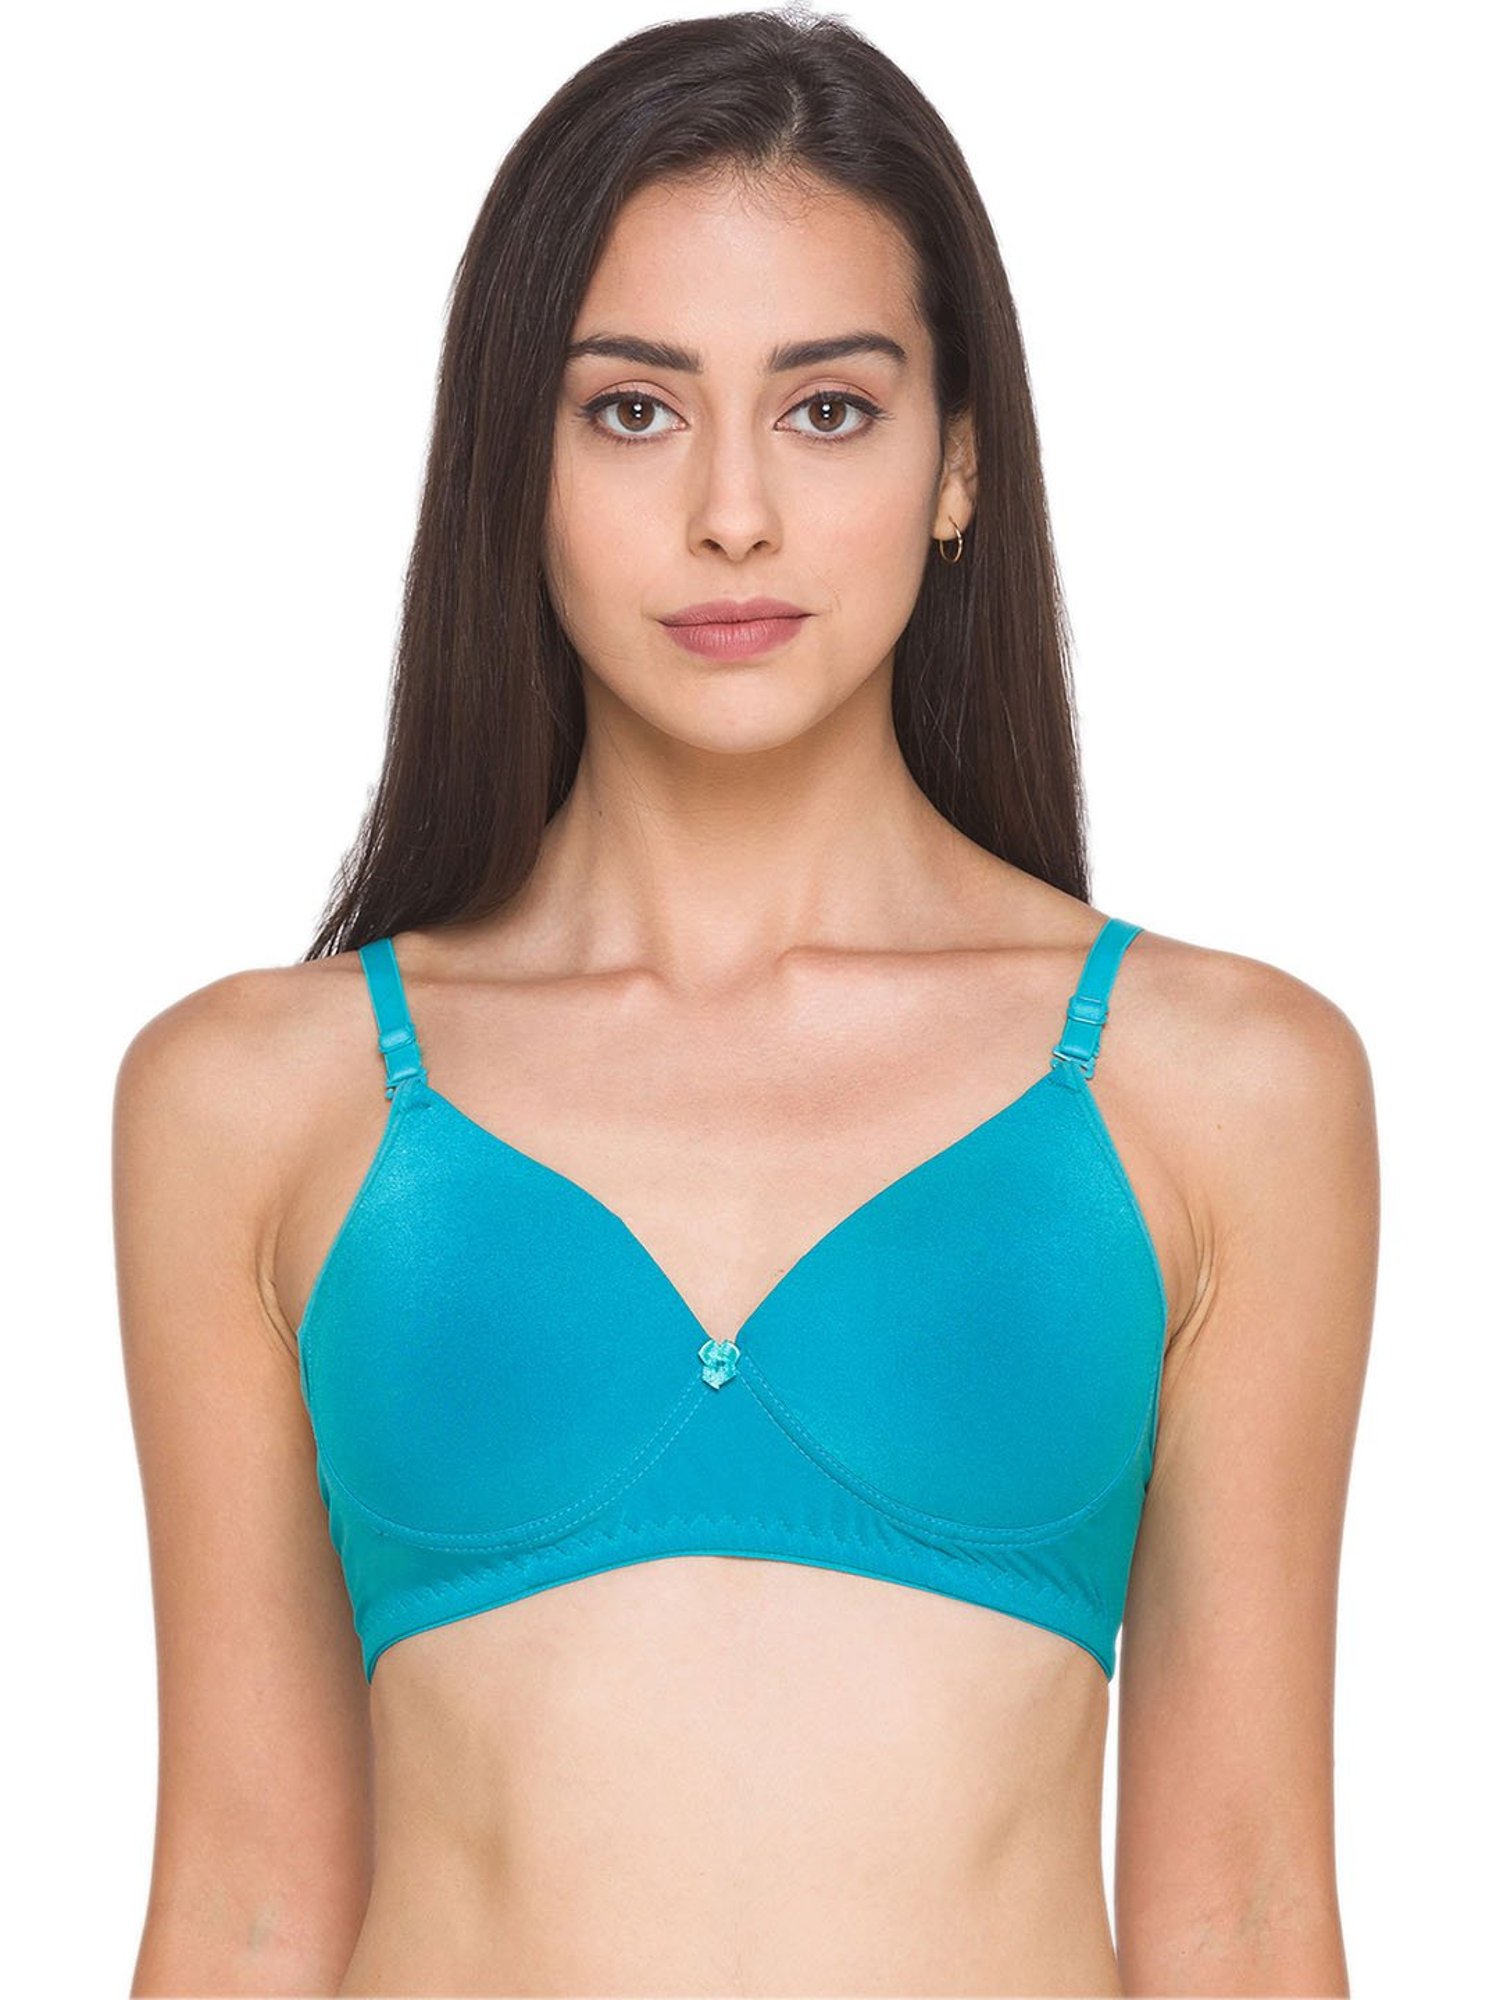 Women's Bra Size 42D Turquoise Padded Full Coverage Underwire Bra. A34